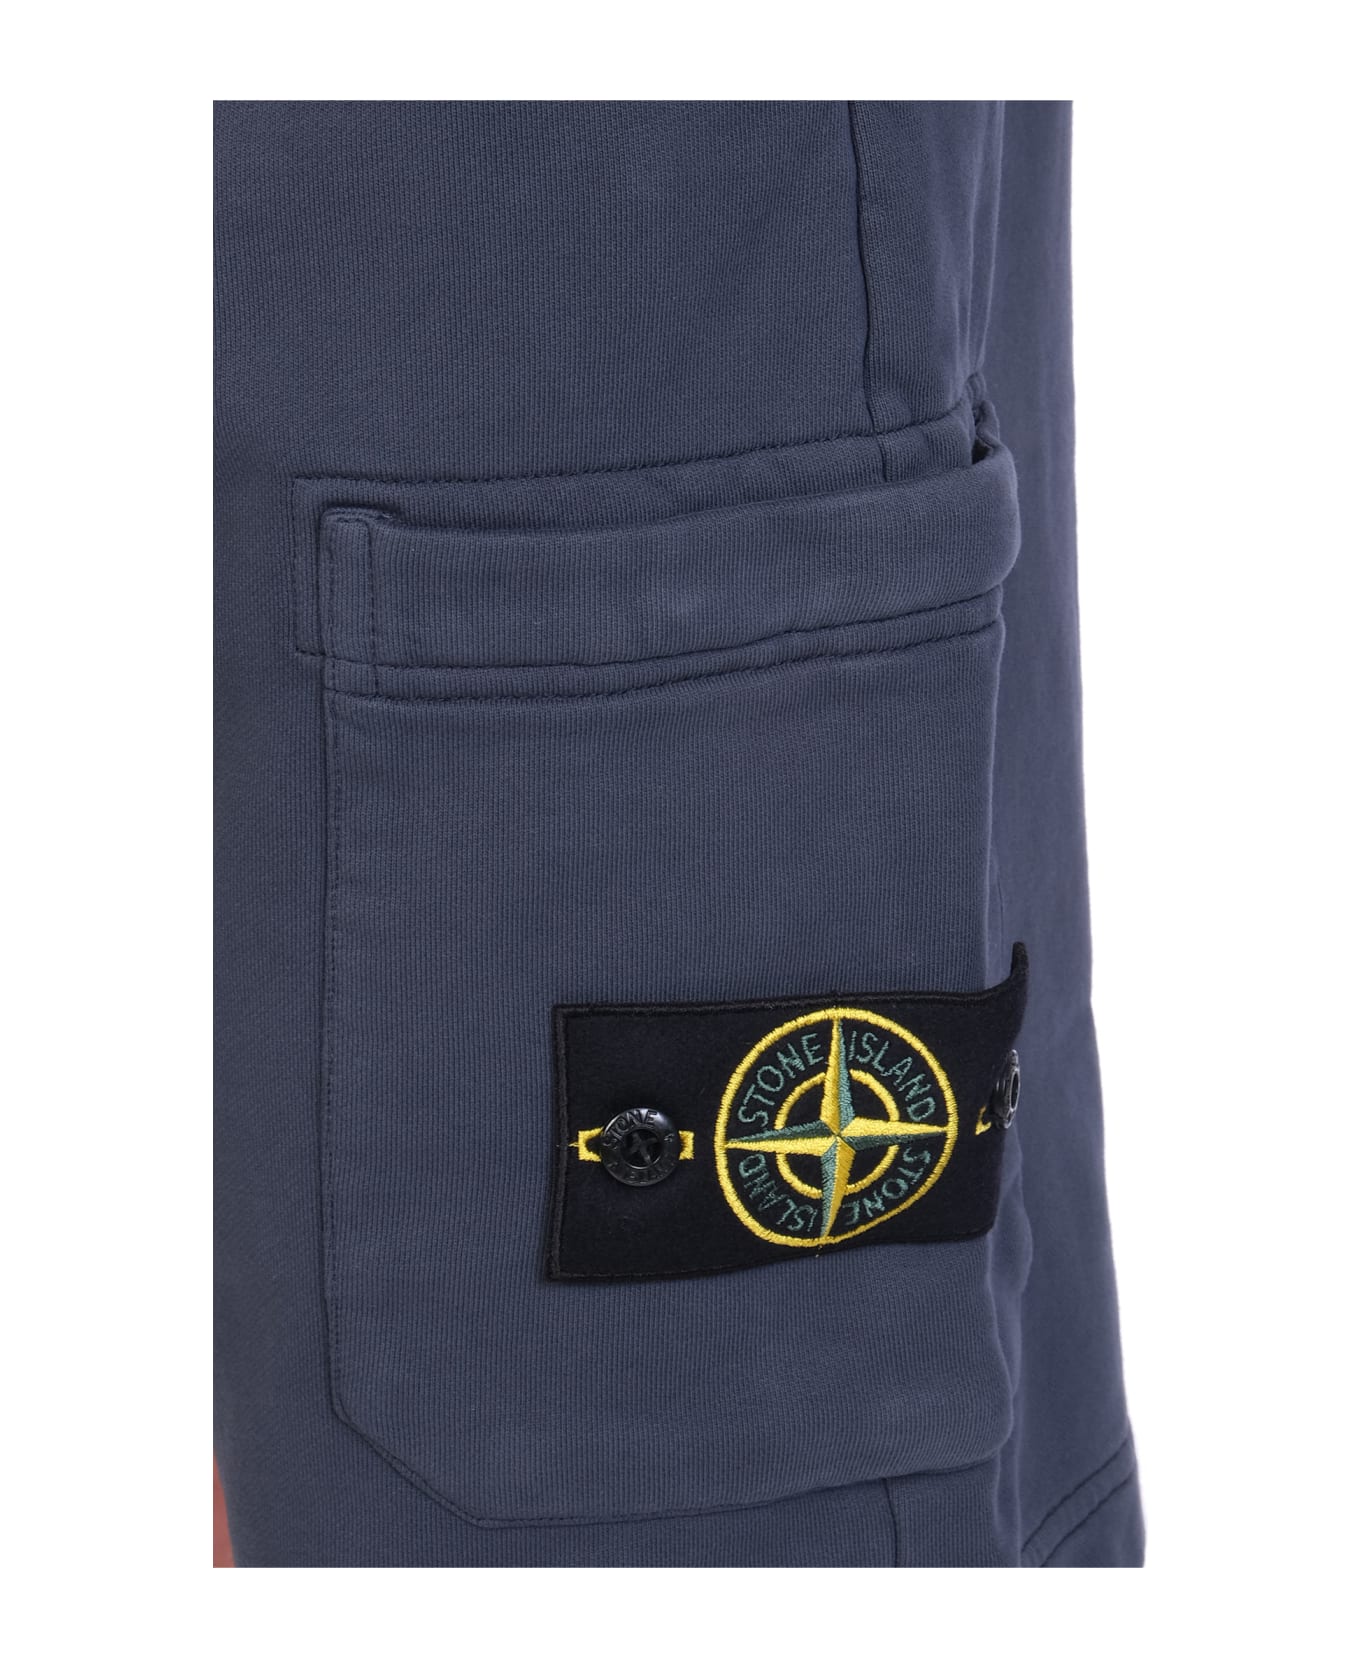 Stone Island Shorts In Blue Cotton - blue